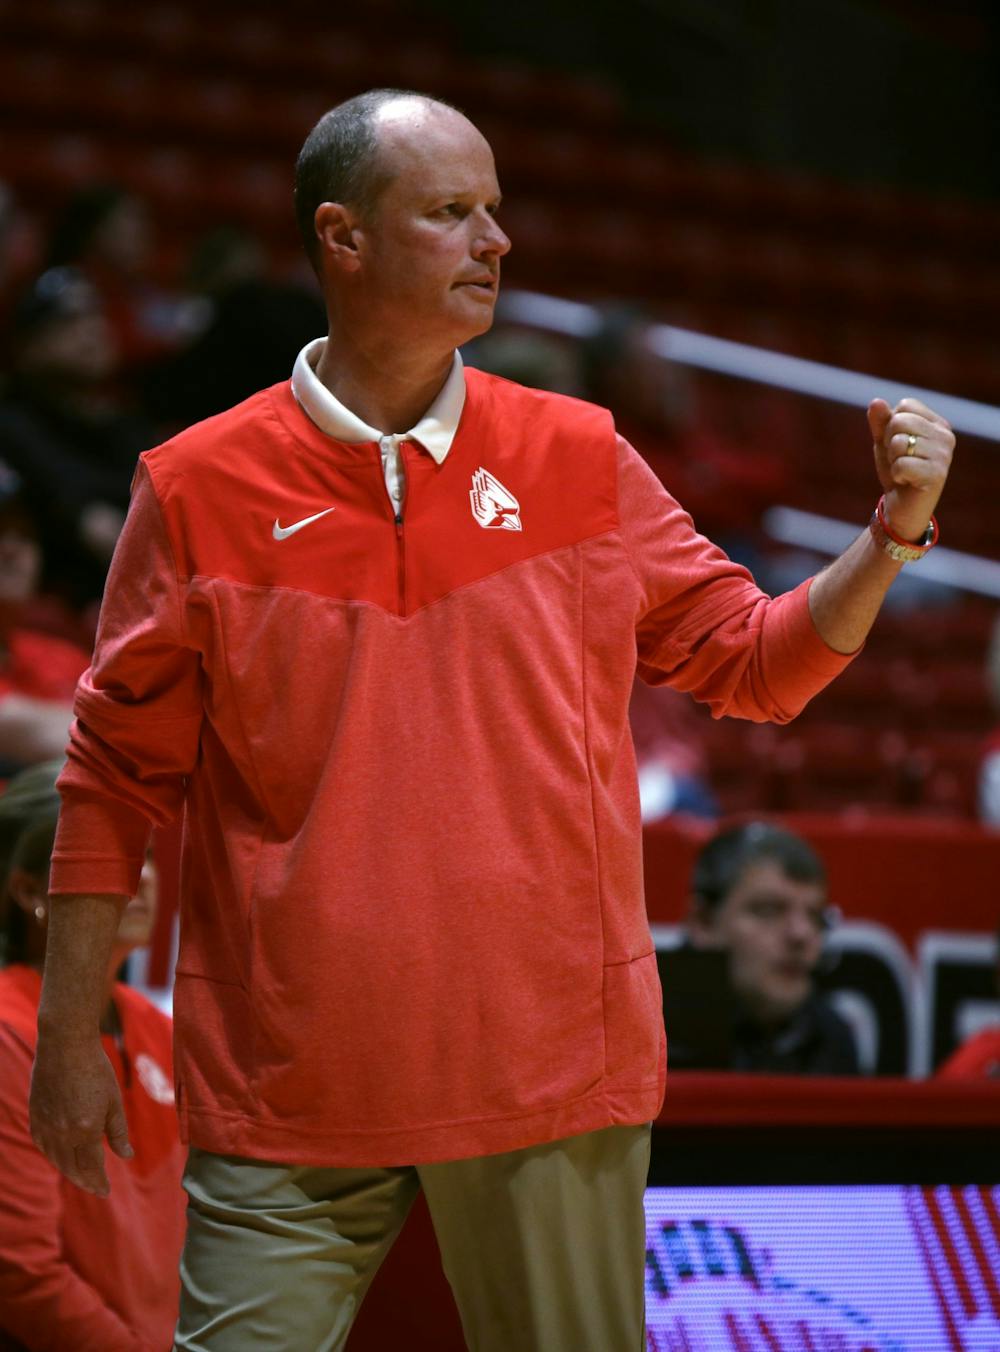 Sallee earns 200th win as a Cardinal in Ball State Women's Basketball's  victory over Ohio - Ball State Daily